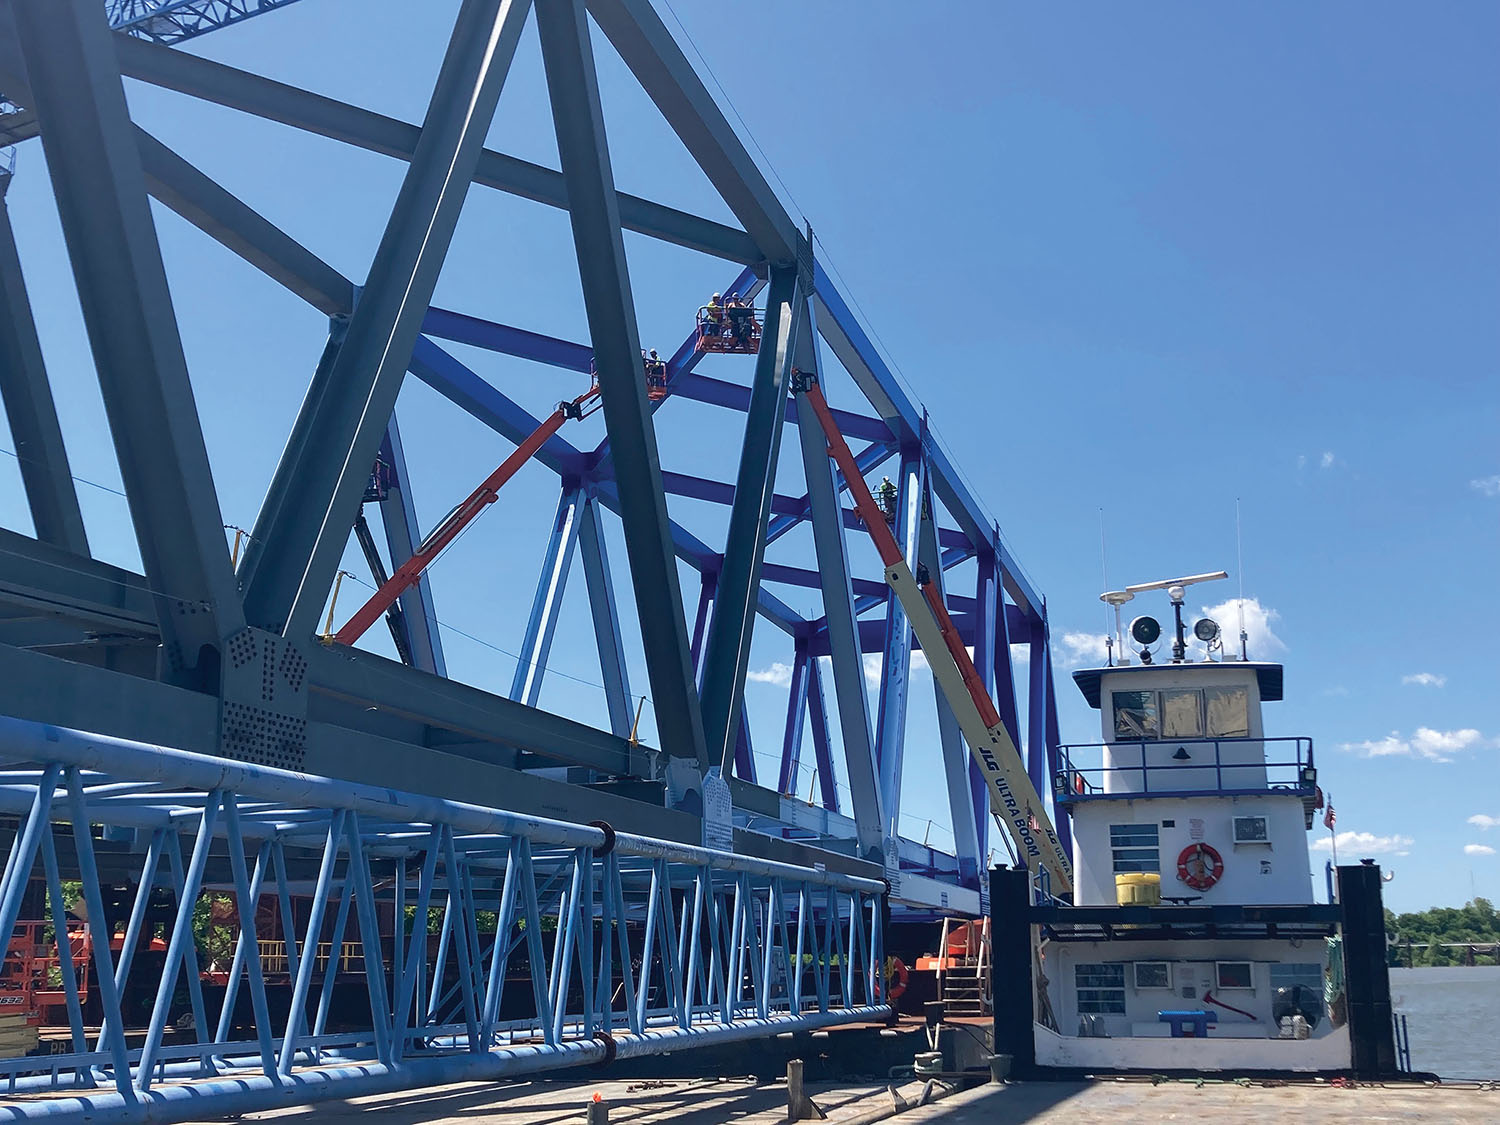 Assembly of the 700-foot steel truss for the main span of the new Cumberland River Bridge at Smithland, Ky., was completed in late February, and painting is now 30-40 percent completed. (Photo by Martina Britts, American Bridge Company)